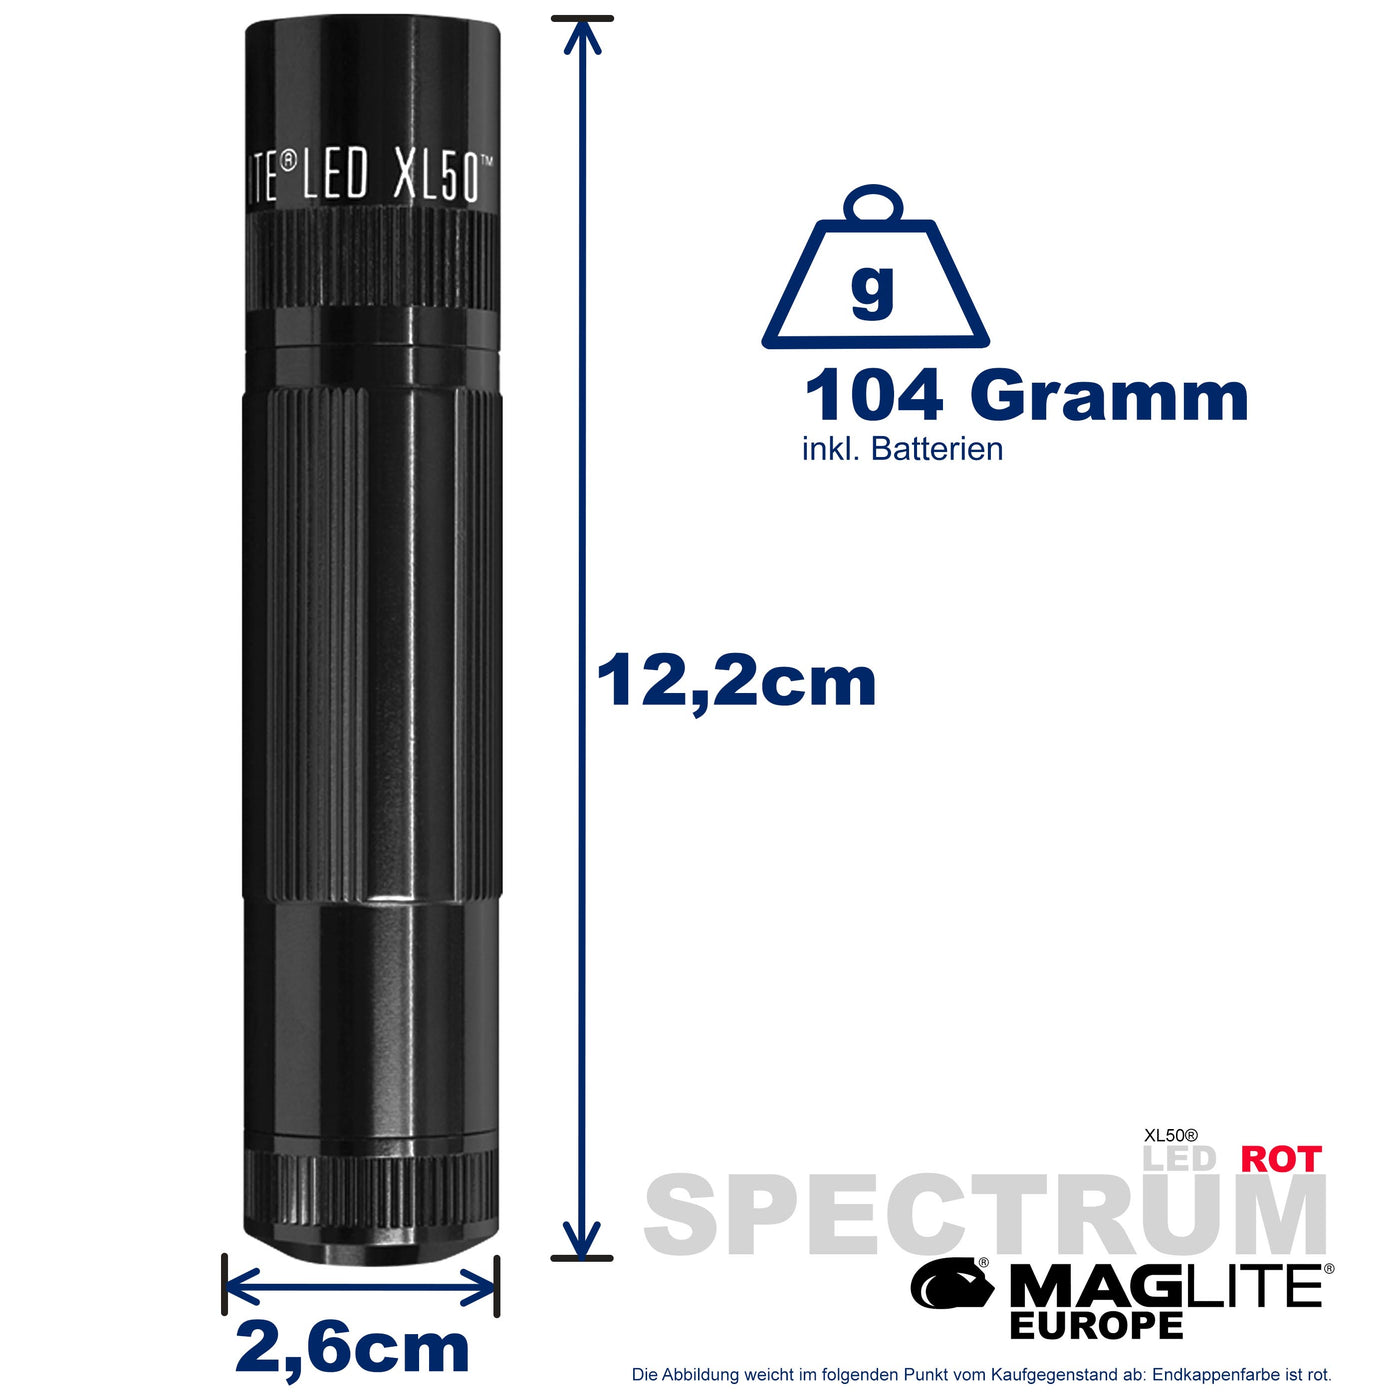 Maglite® Spectrum Series™ with red LED